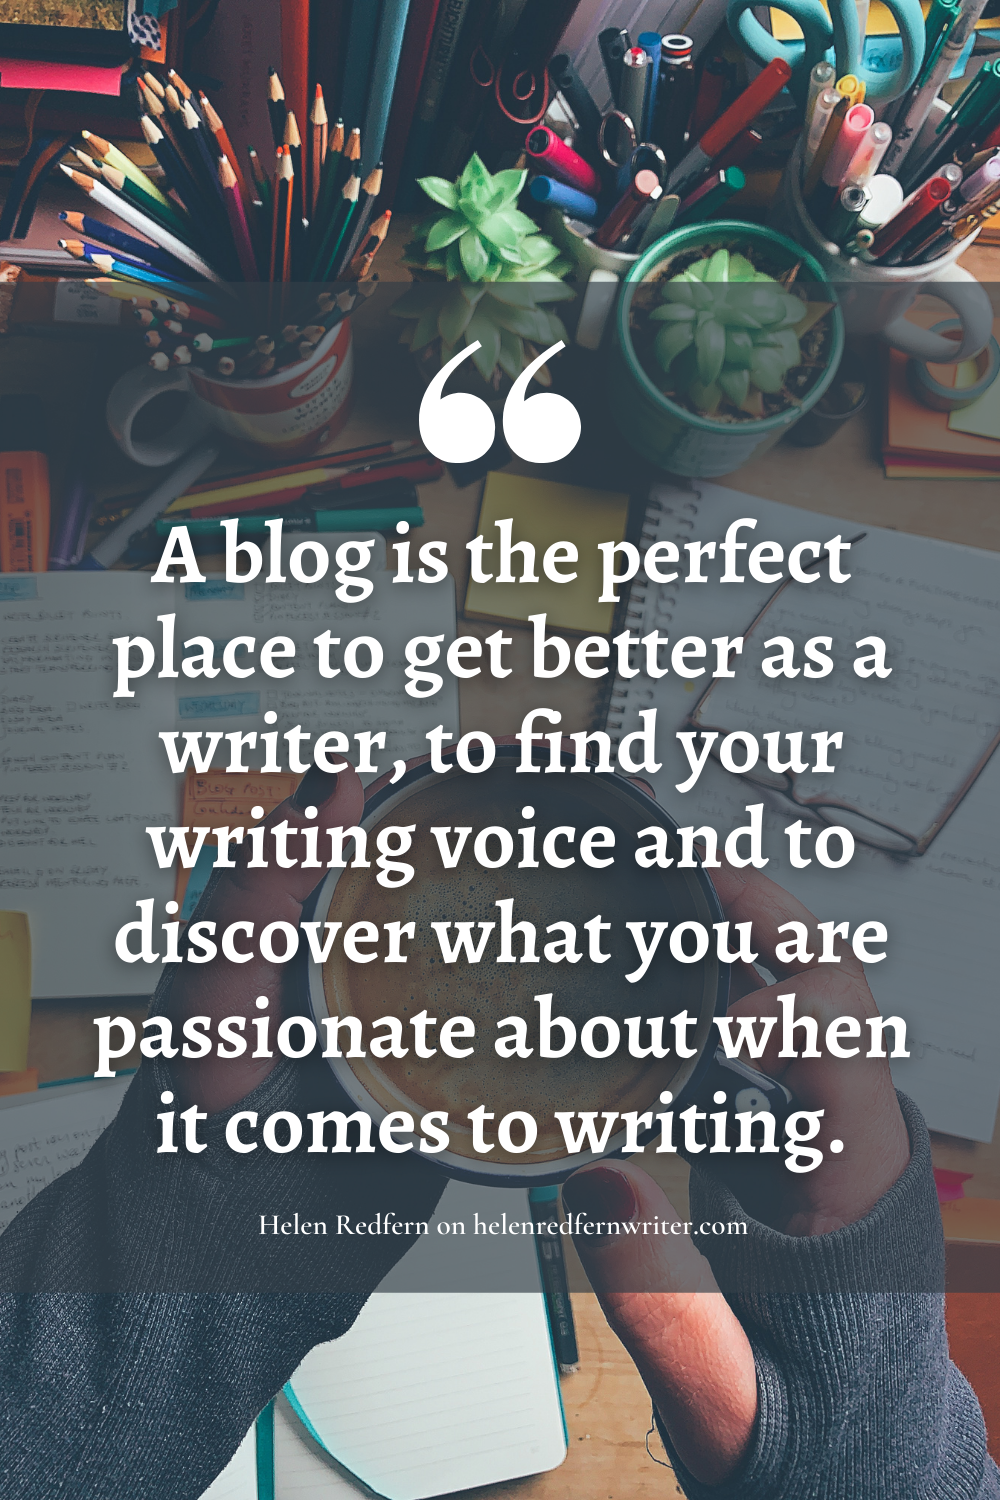 blogging as a writer quote-2.png